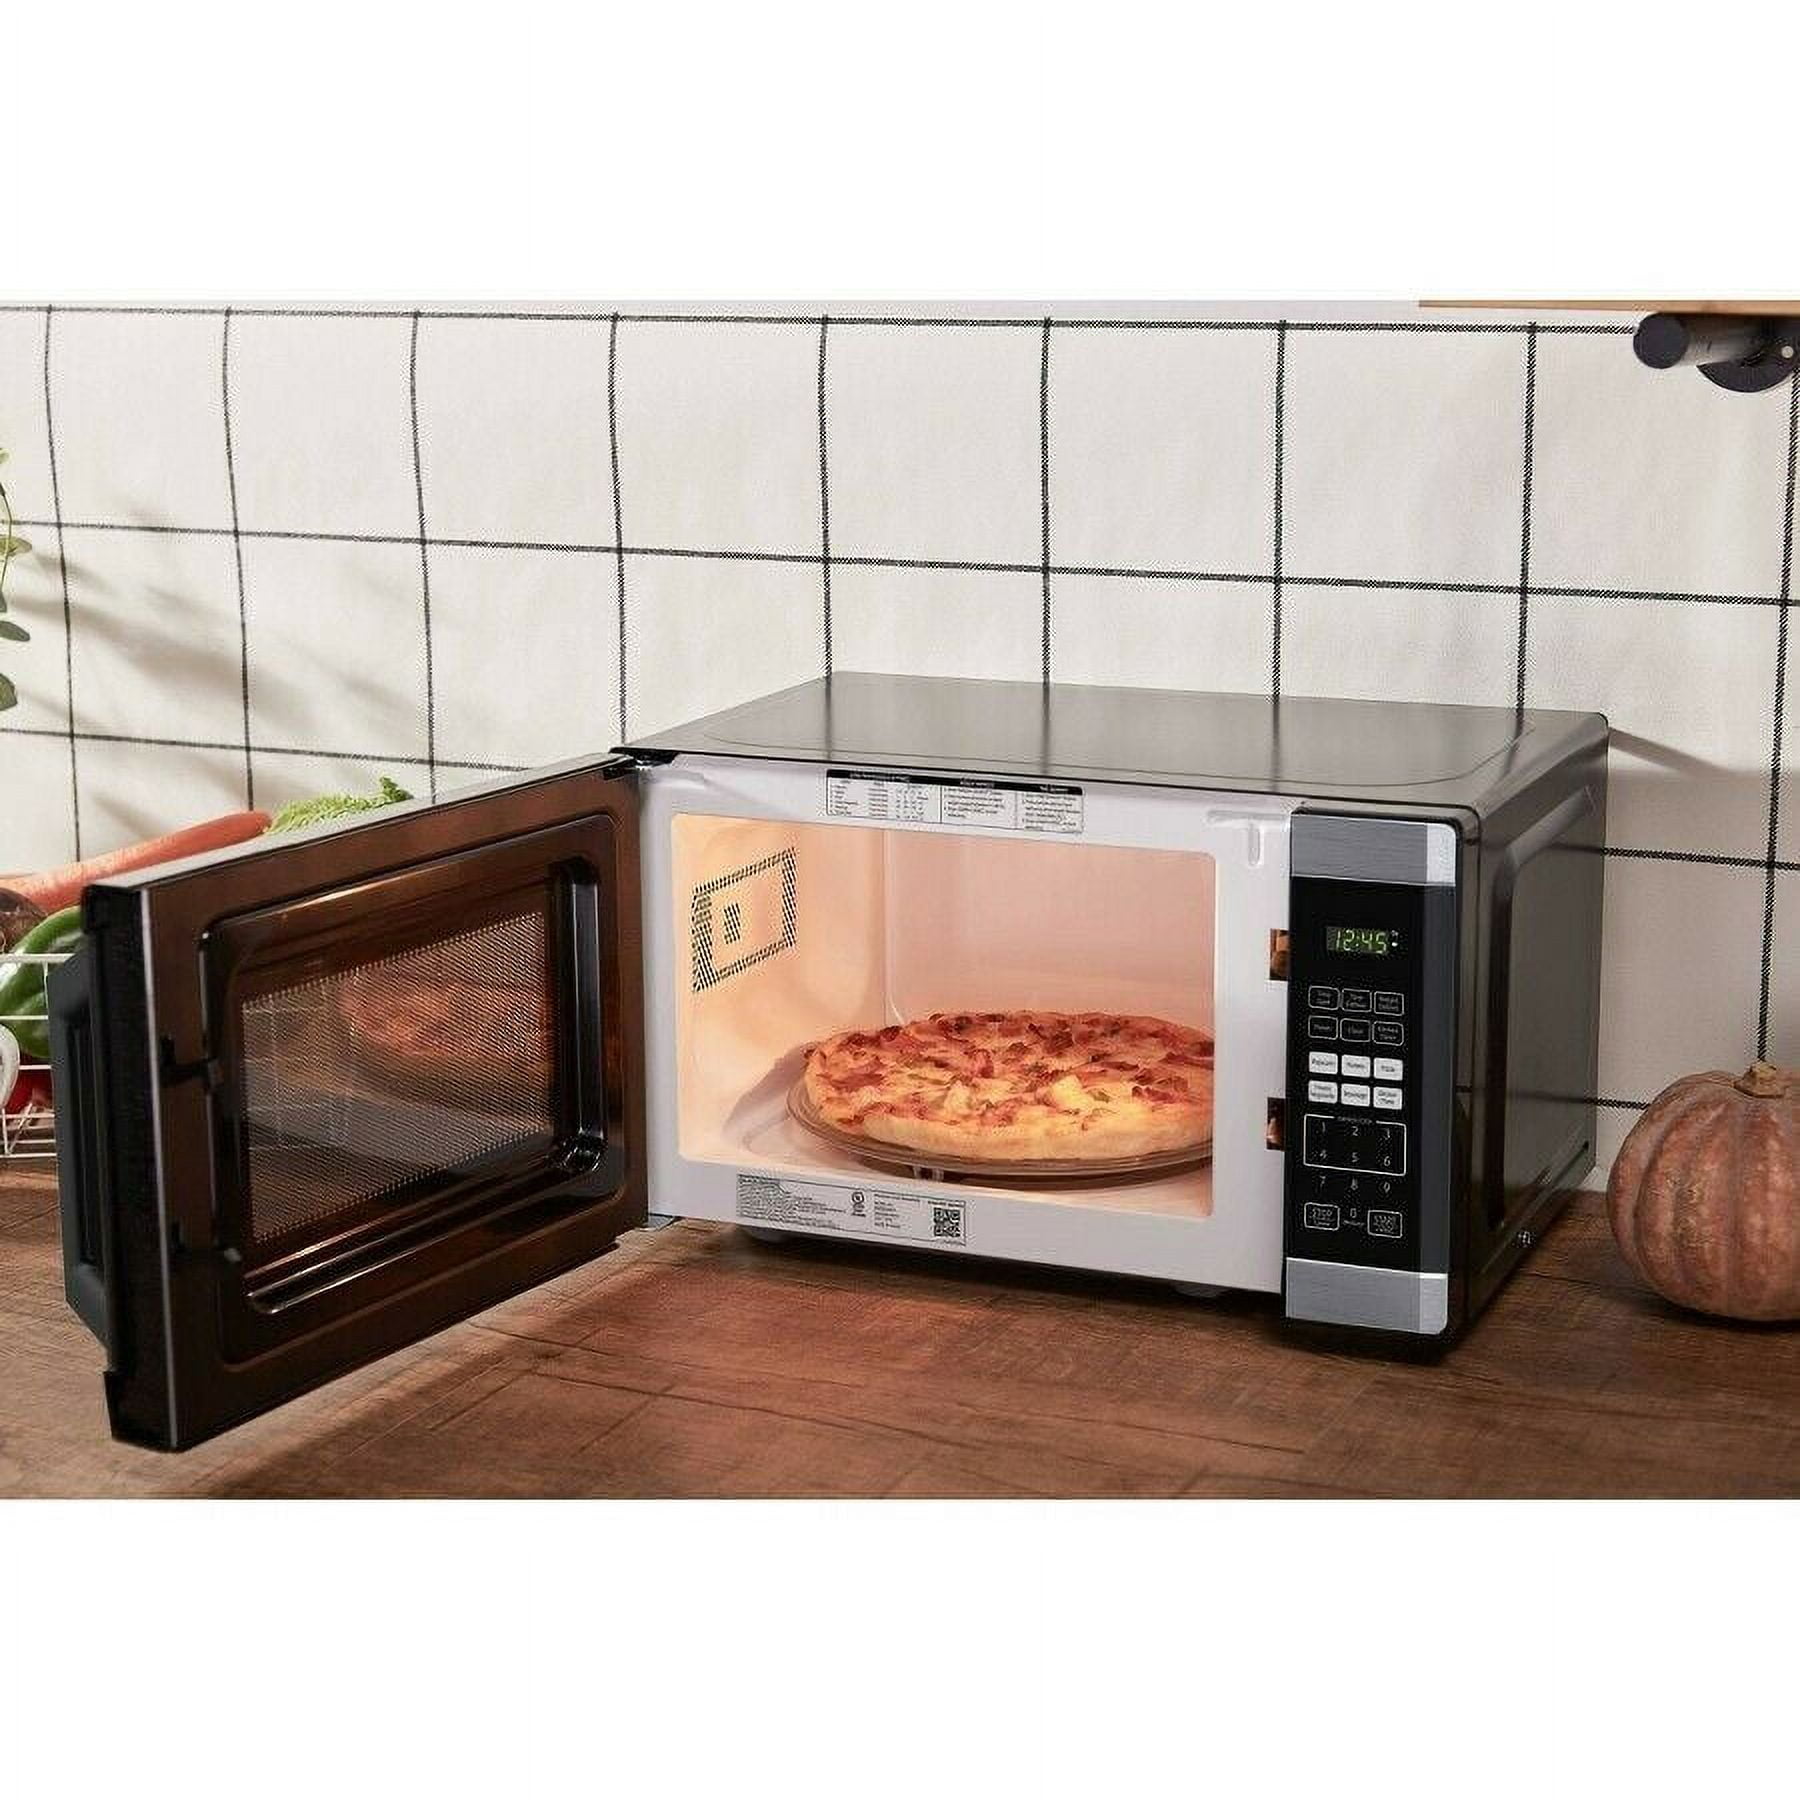 Home Centre Eastern Region Ltd - Black+Decker 0.9 Cu. Ft. Microwave  Time/weight defrost allows you to defrost frozen foods by simply entering  the weight or time Auto-menu function - sit back and